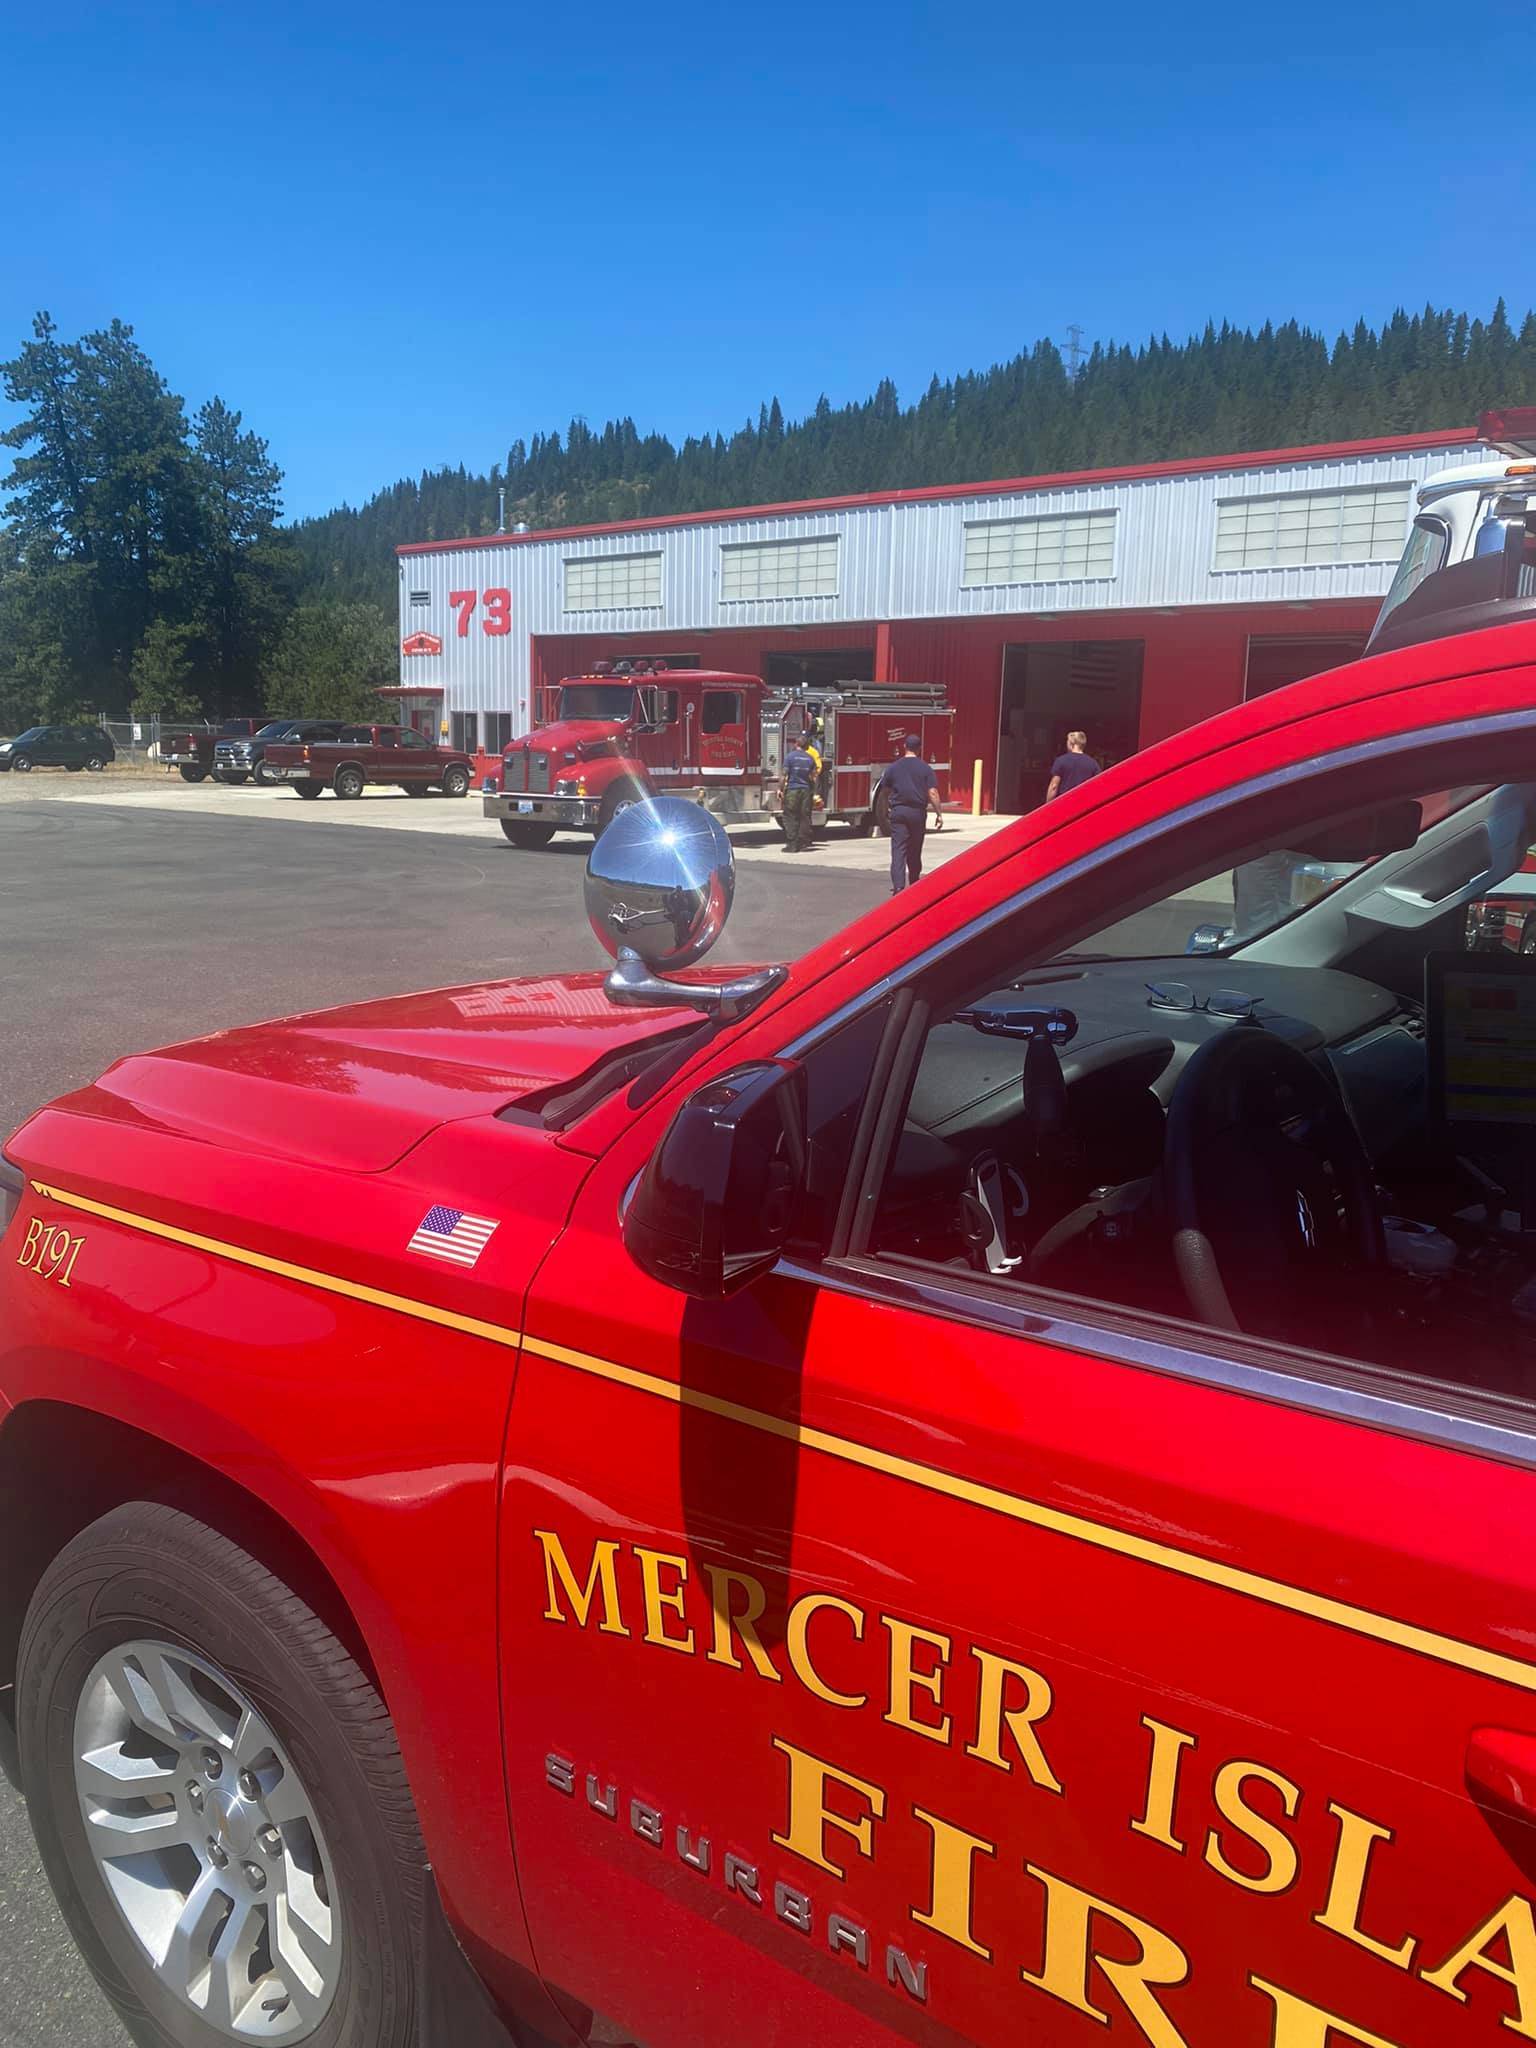 A task force, which included Mercer Island Fire, backfills Kittitas Fire District 7’s Fire Station 73 on June 26. Photo courtesy of the Mercer Island Fire Department